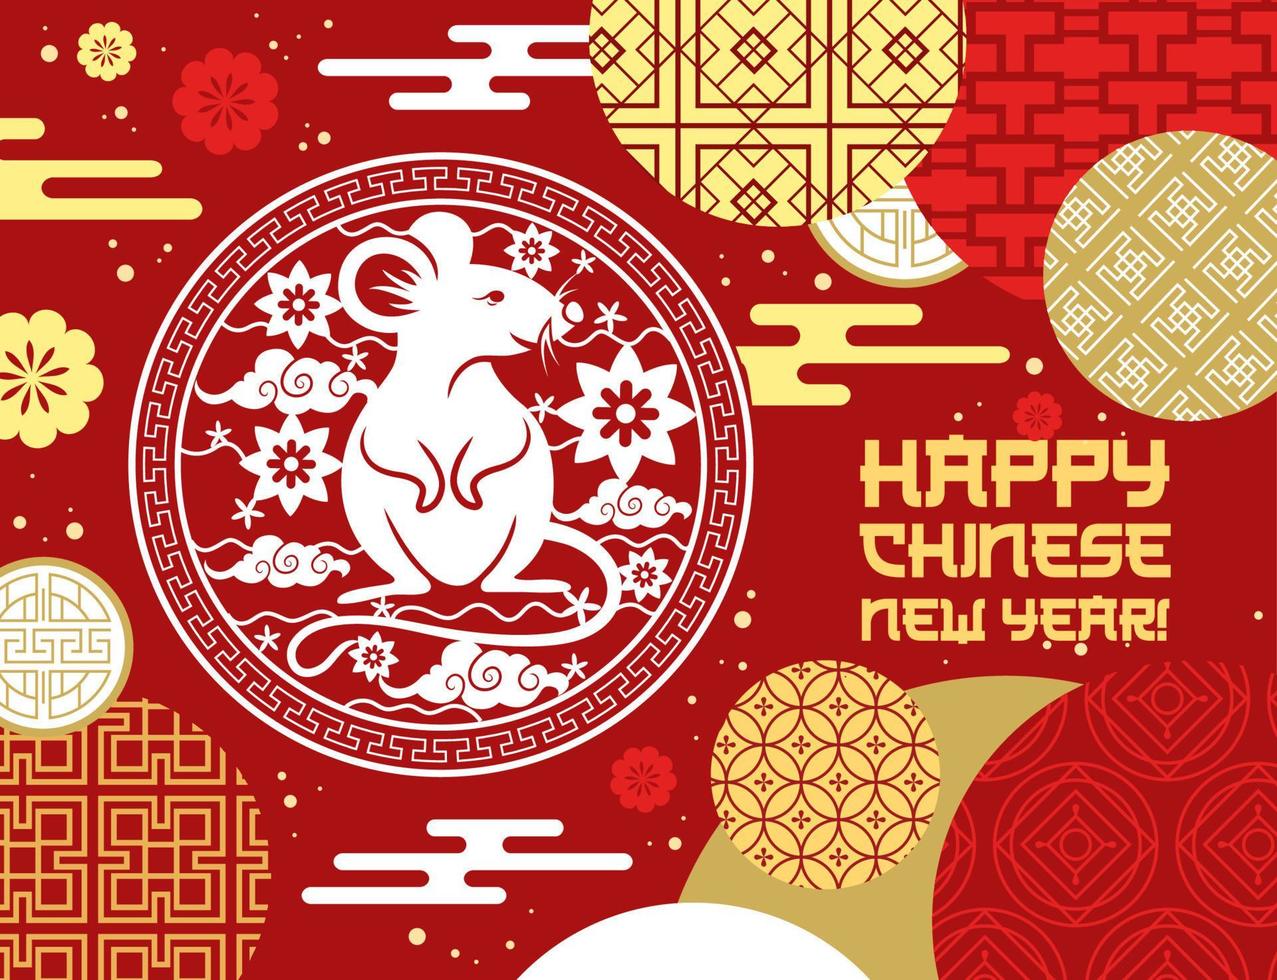 Chinese New Year, rat sign, gold coins pattern vector